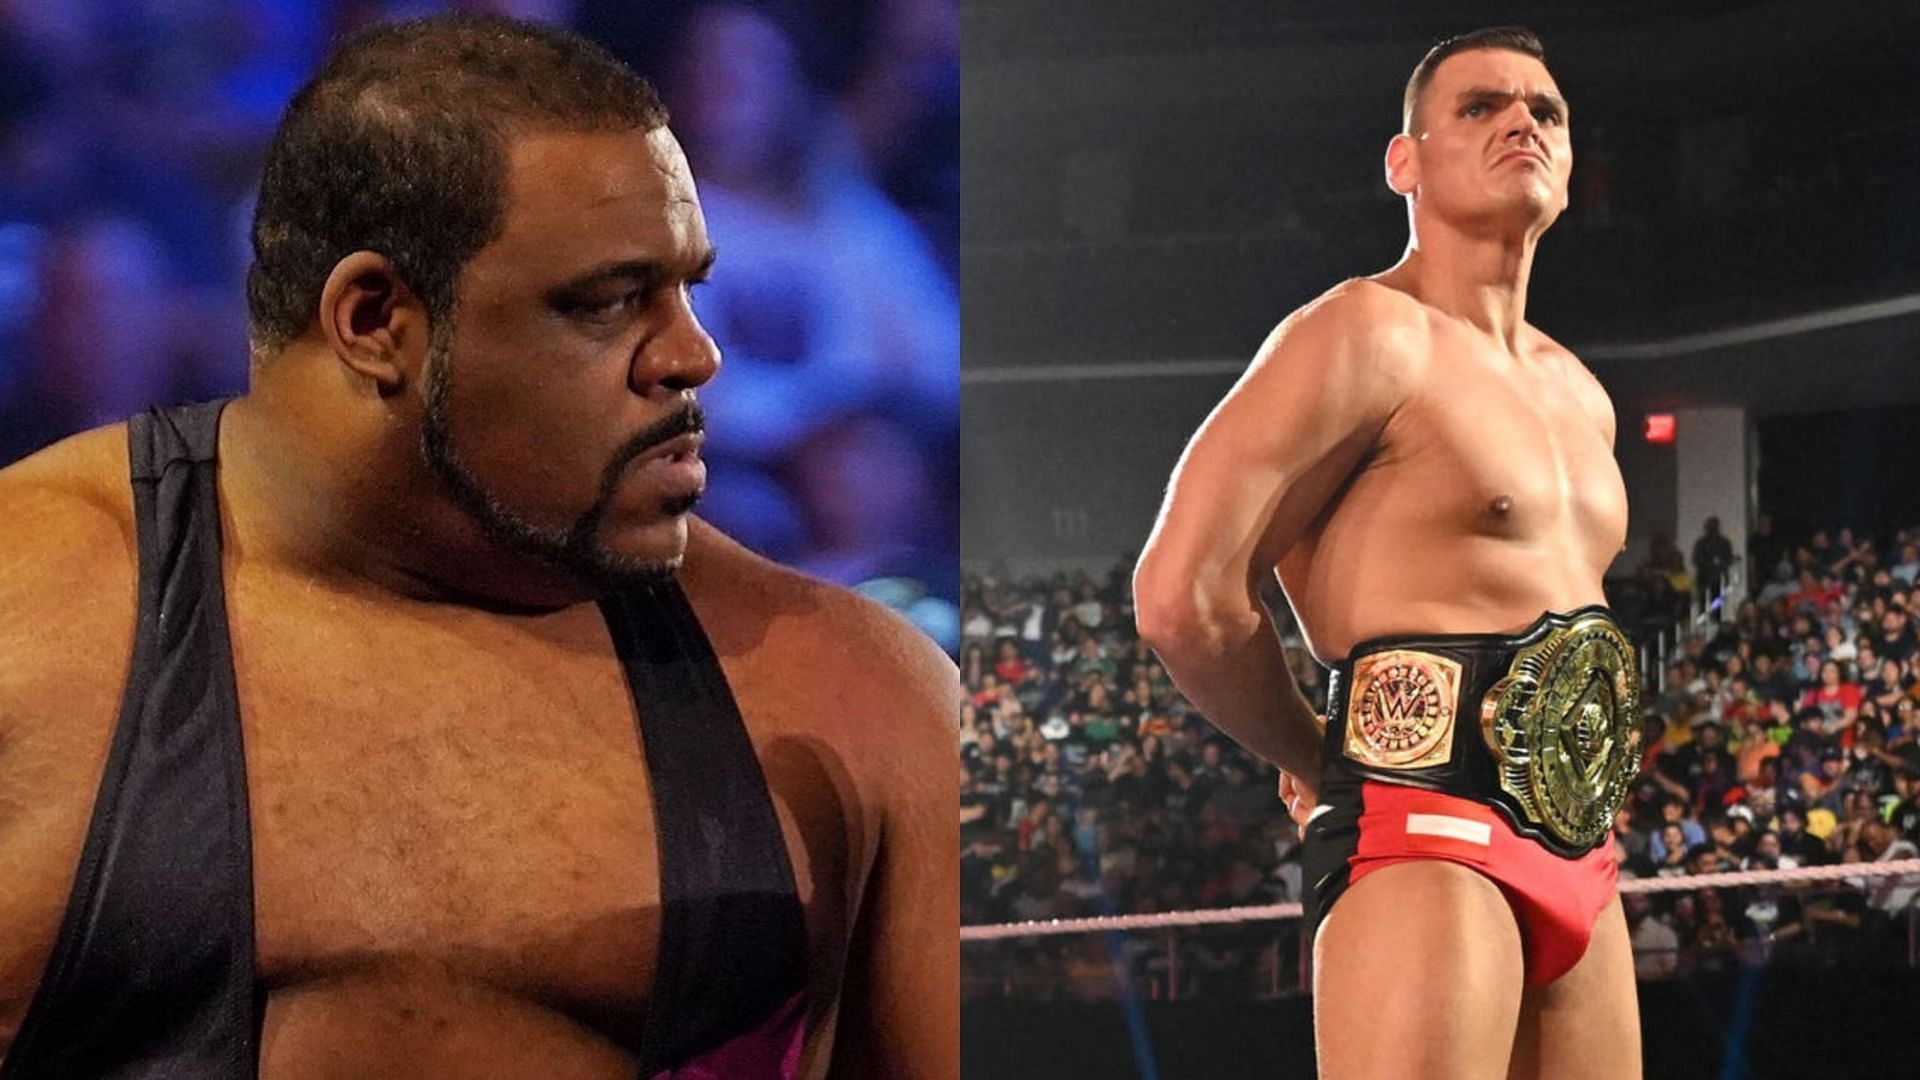 Keith Lee is currently signed to AEW, whereas, GUNTHER is the current WWE IC Champion